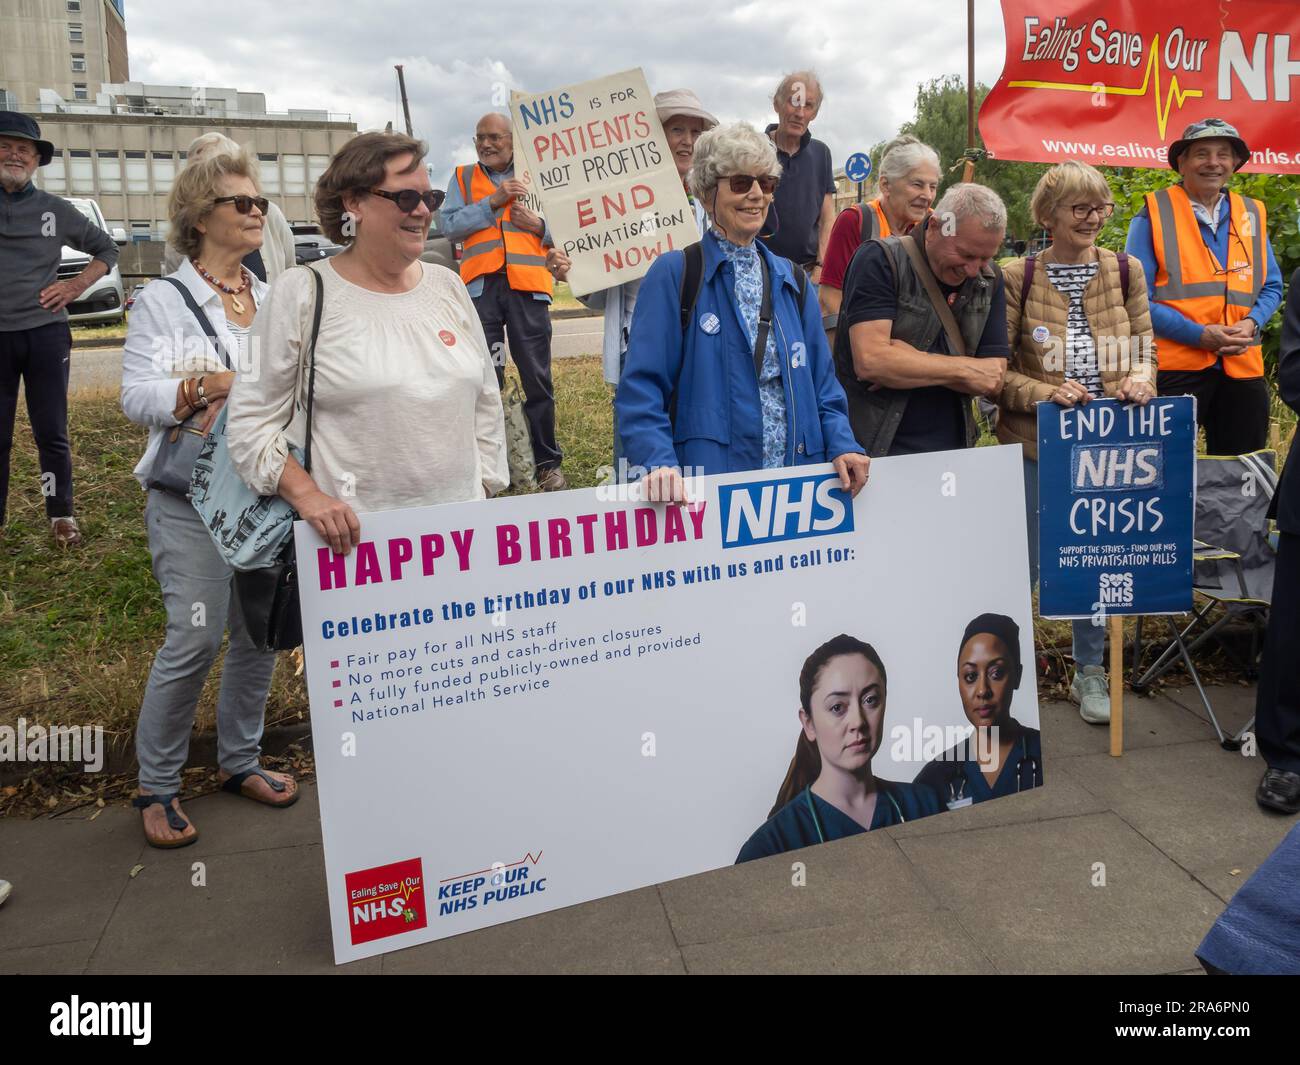 London, UK. 1 July 2023. Campaigners from Ealing Save Our NHS celebrated 75 years of the NHS on the side of the main road in front of Ealing Hospital. Speakers called for a proper workforce plan, pointing out the failure of the recent government plan to recognise the realities of an overworked and underpaid system which has been deliberately run into the ground as a pretext for privatisation. Peter Marshall/Alamy Live News Stock Photo